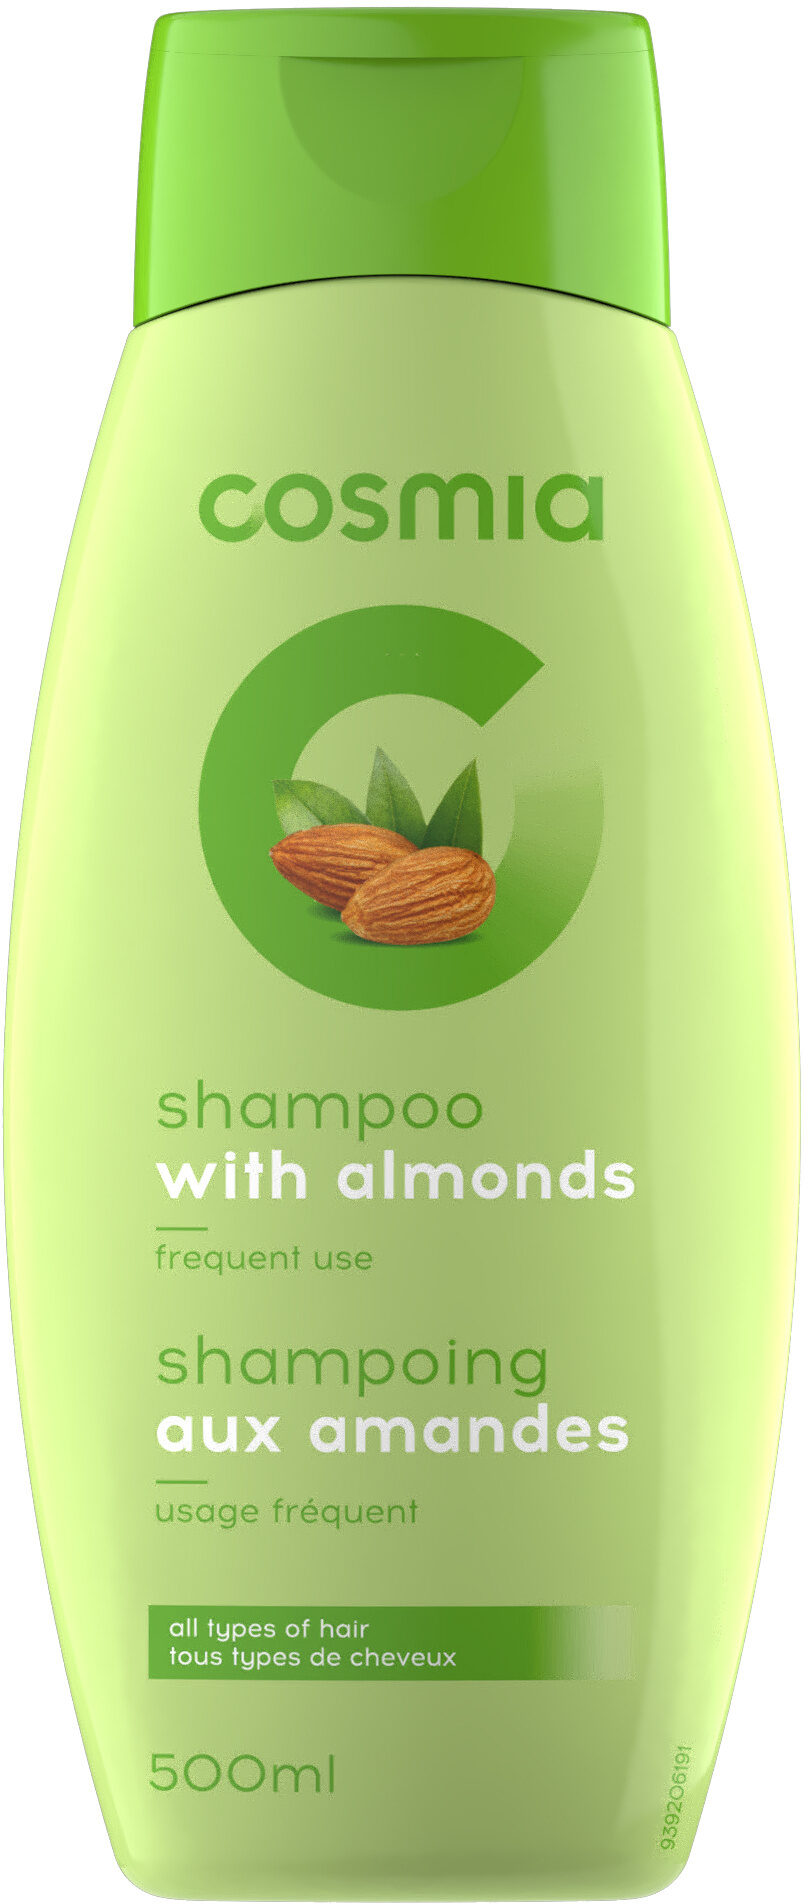 Shampoing aux amandes - Product - fr